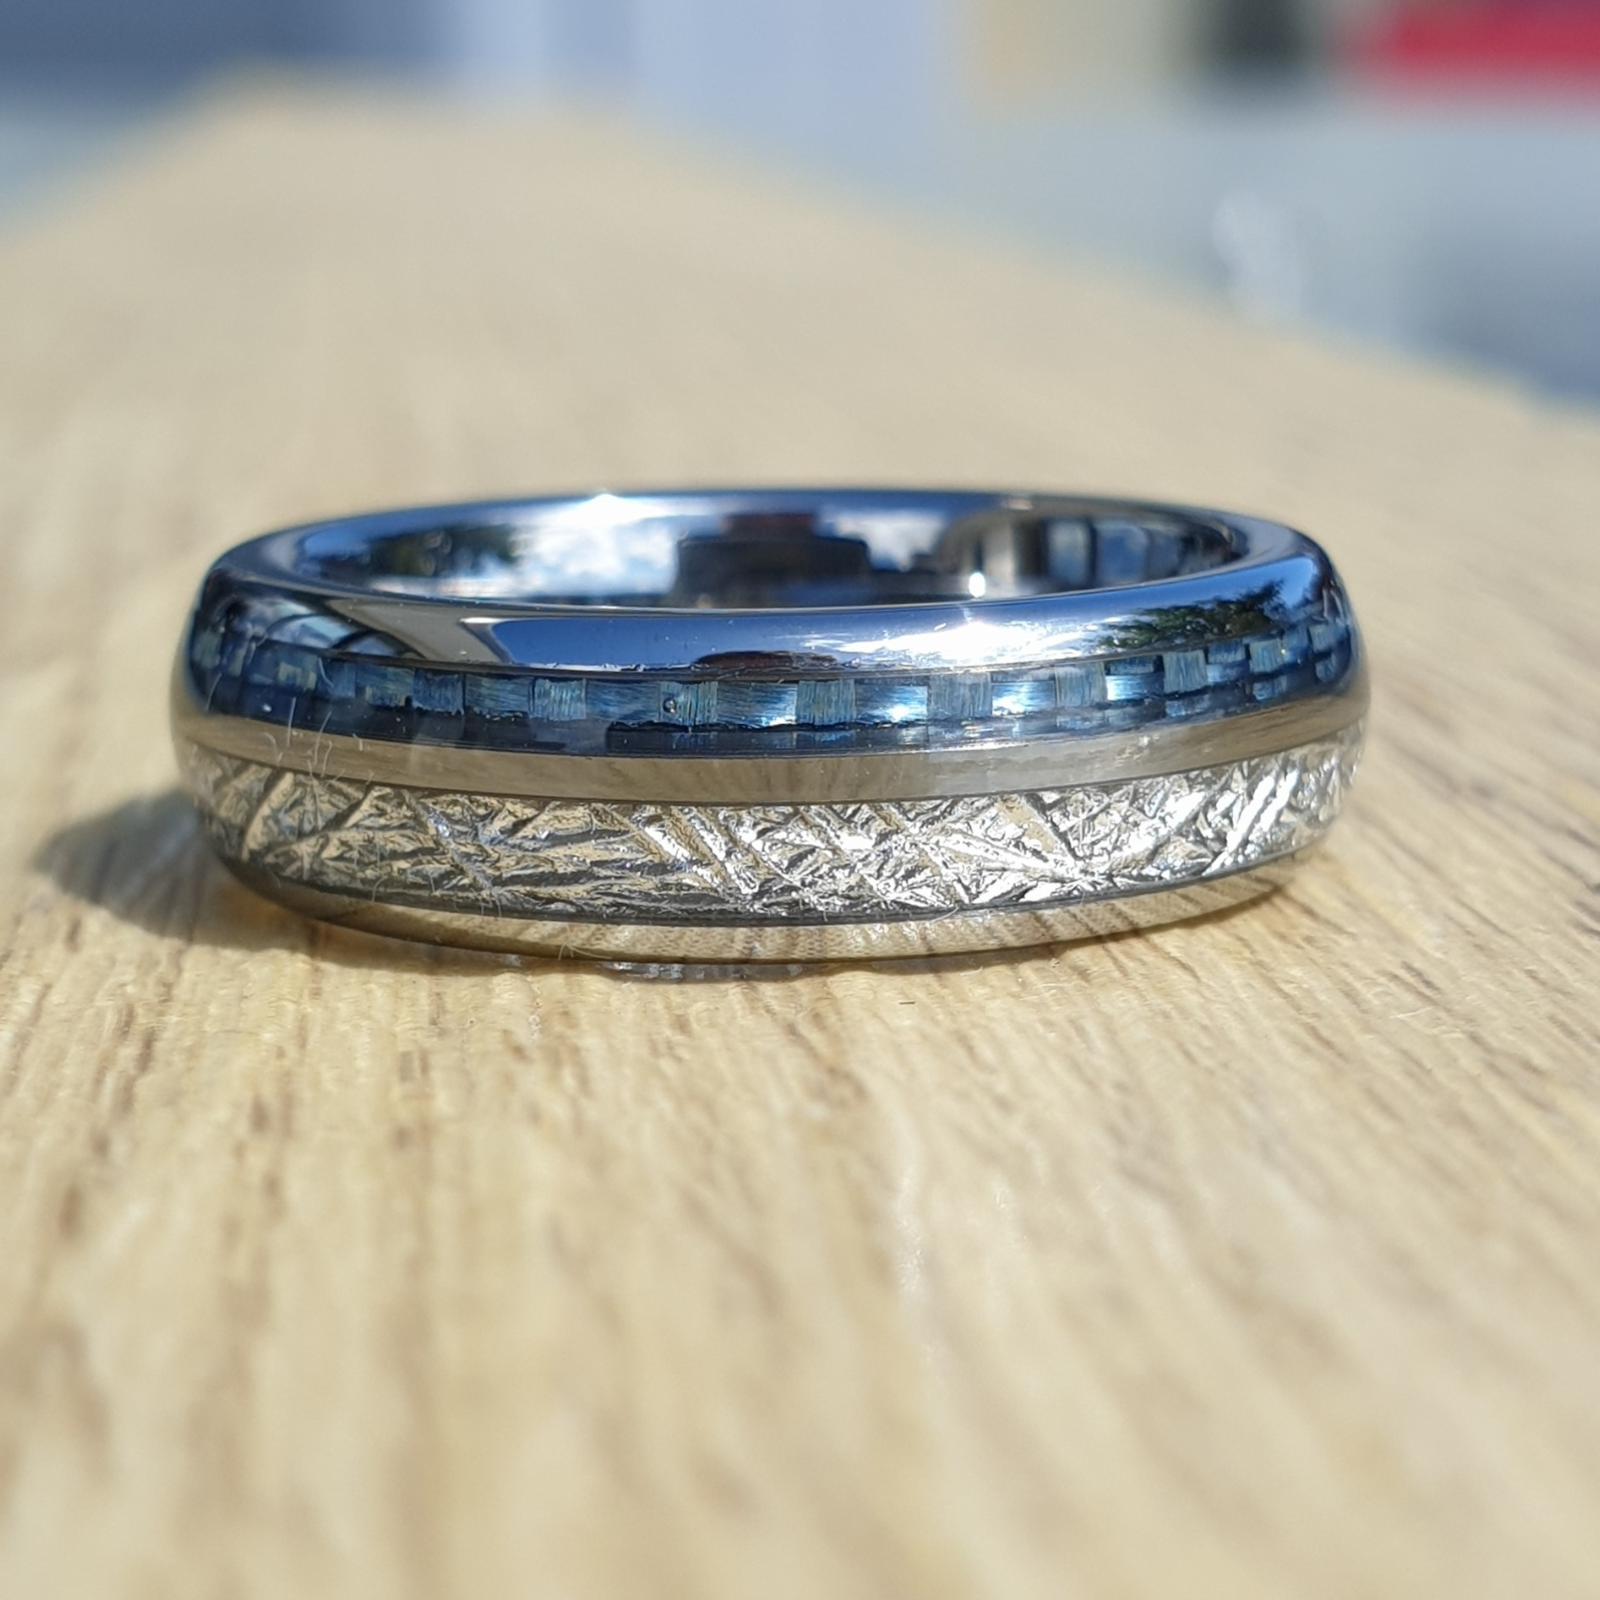 The Steely Blue 6mm Wonder Ring